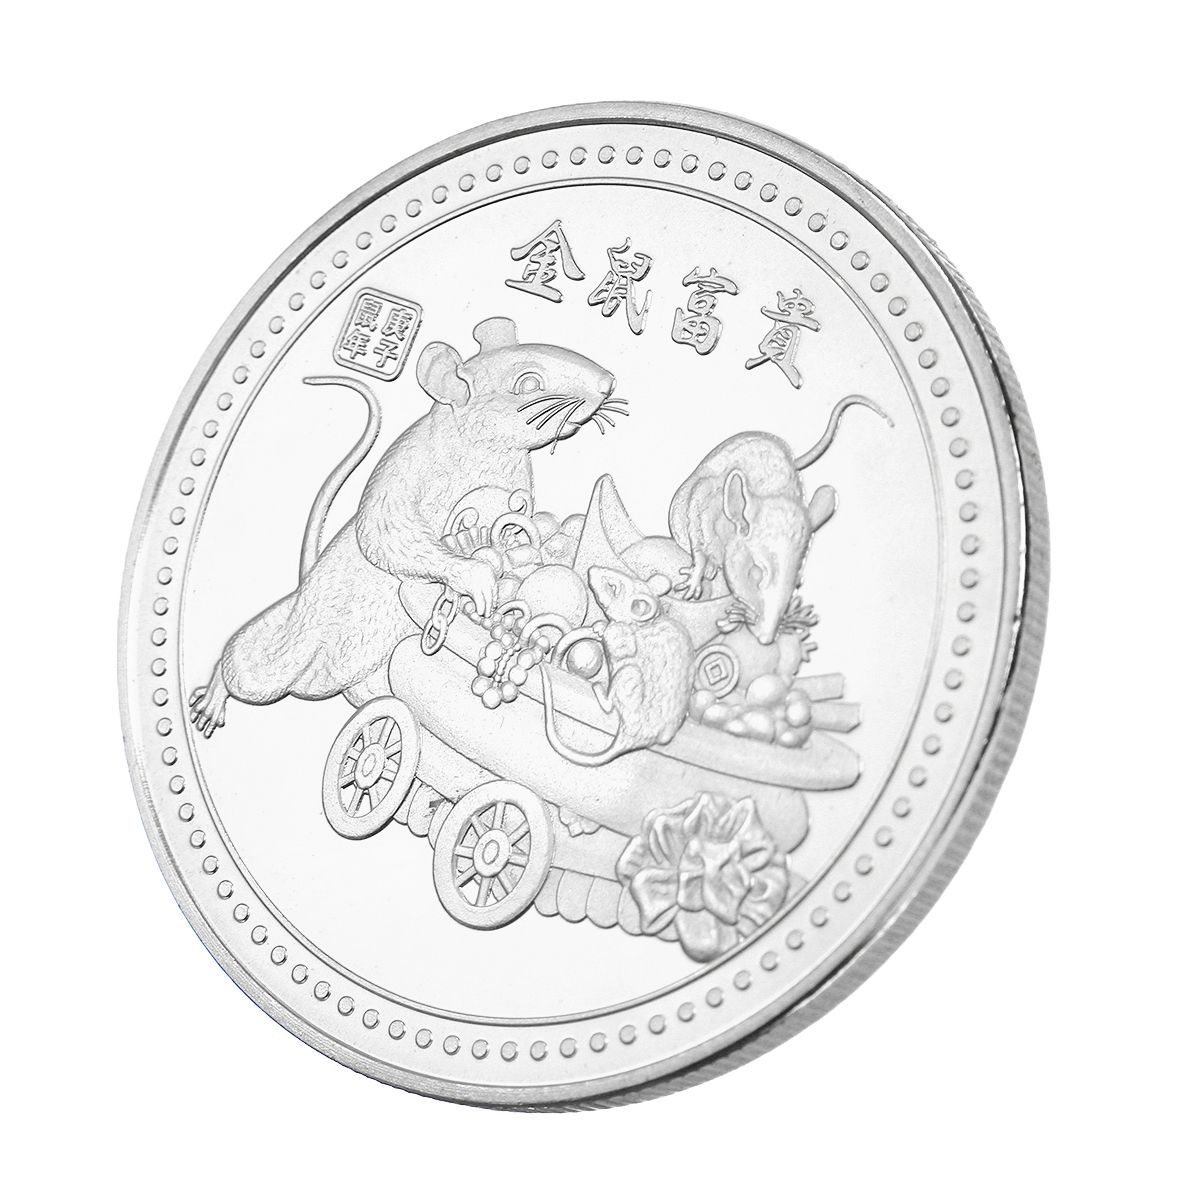 2020-Year-Of-Rat-Commemorative-Coin-Collectibles-New-Year-Gift-Non-currency-Coin-1666772